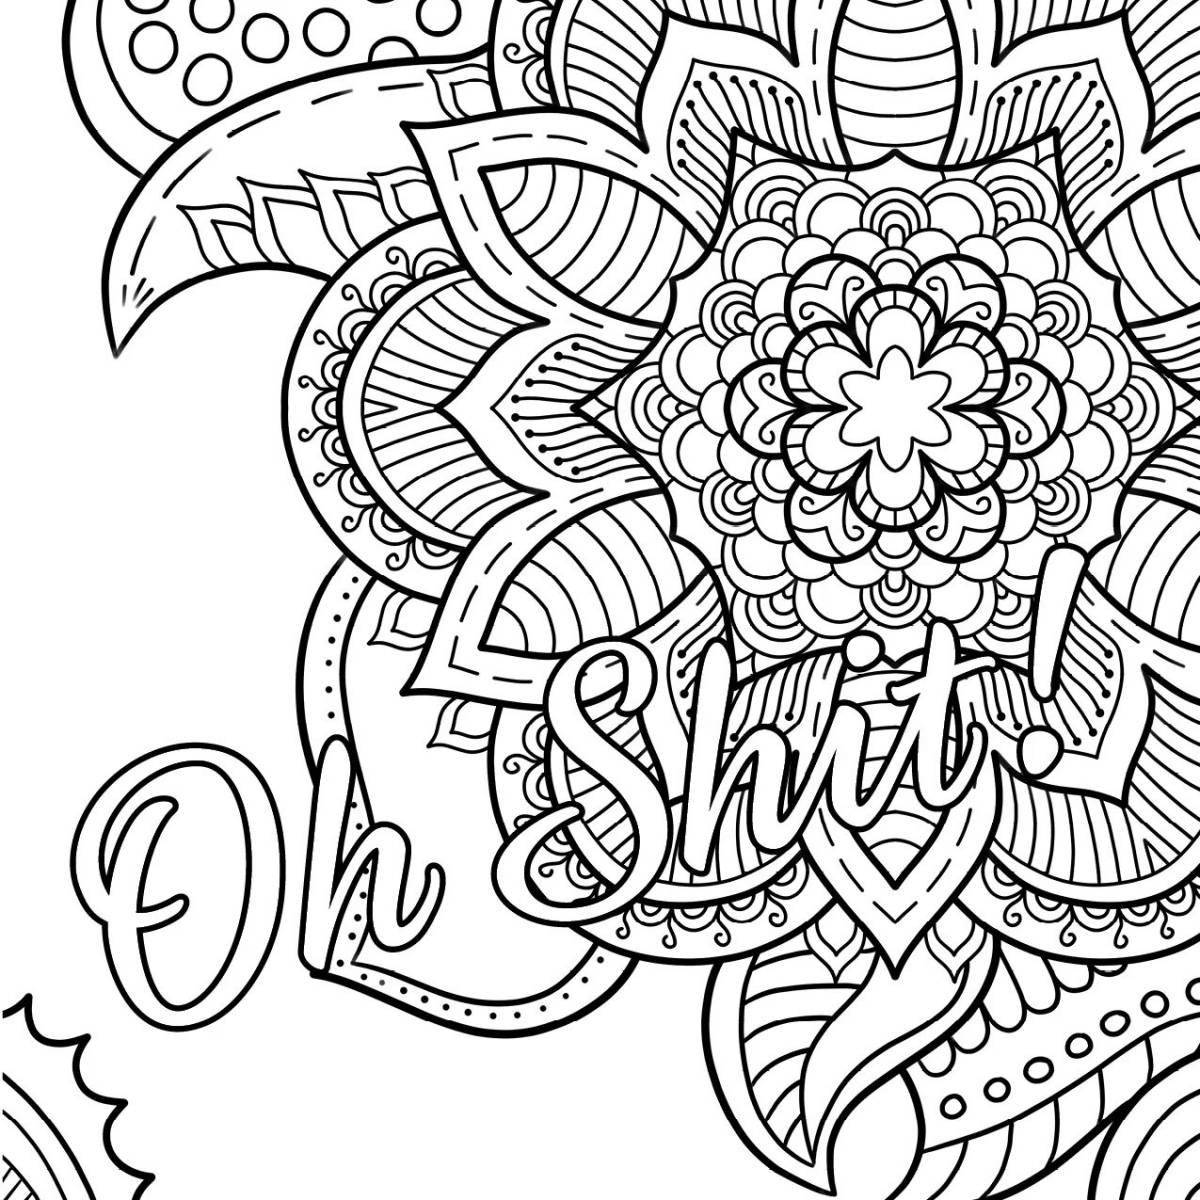 Soulful anti-stress coloring book for adults